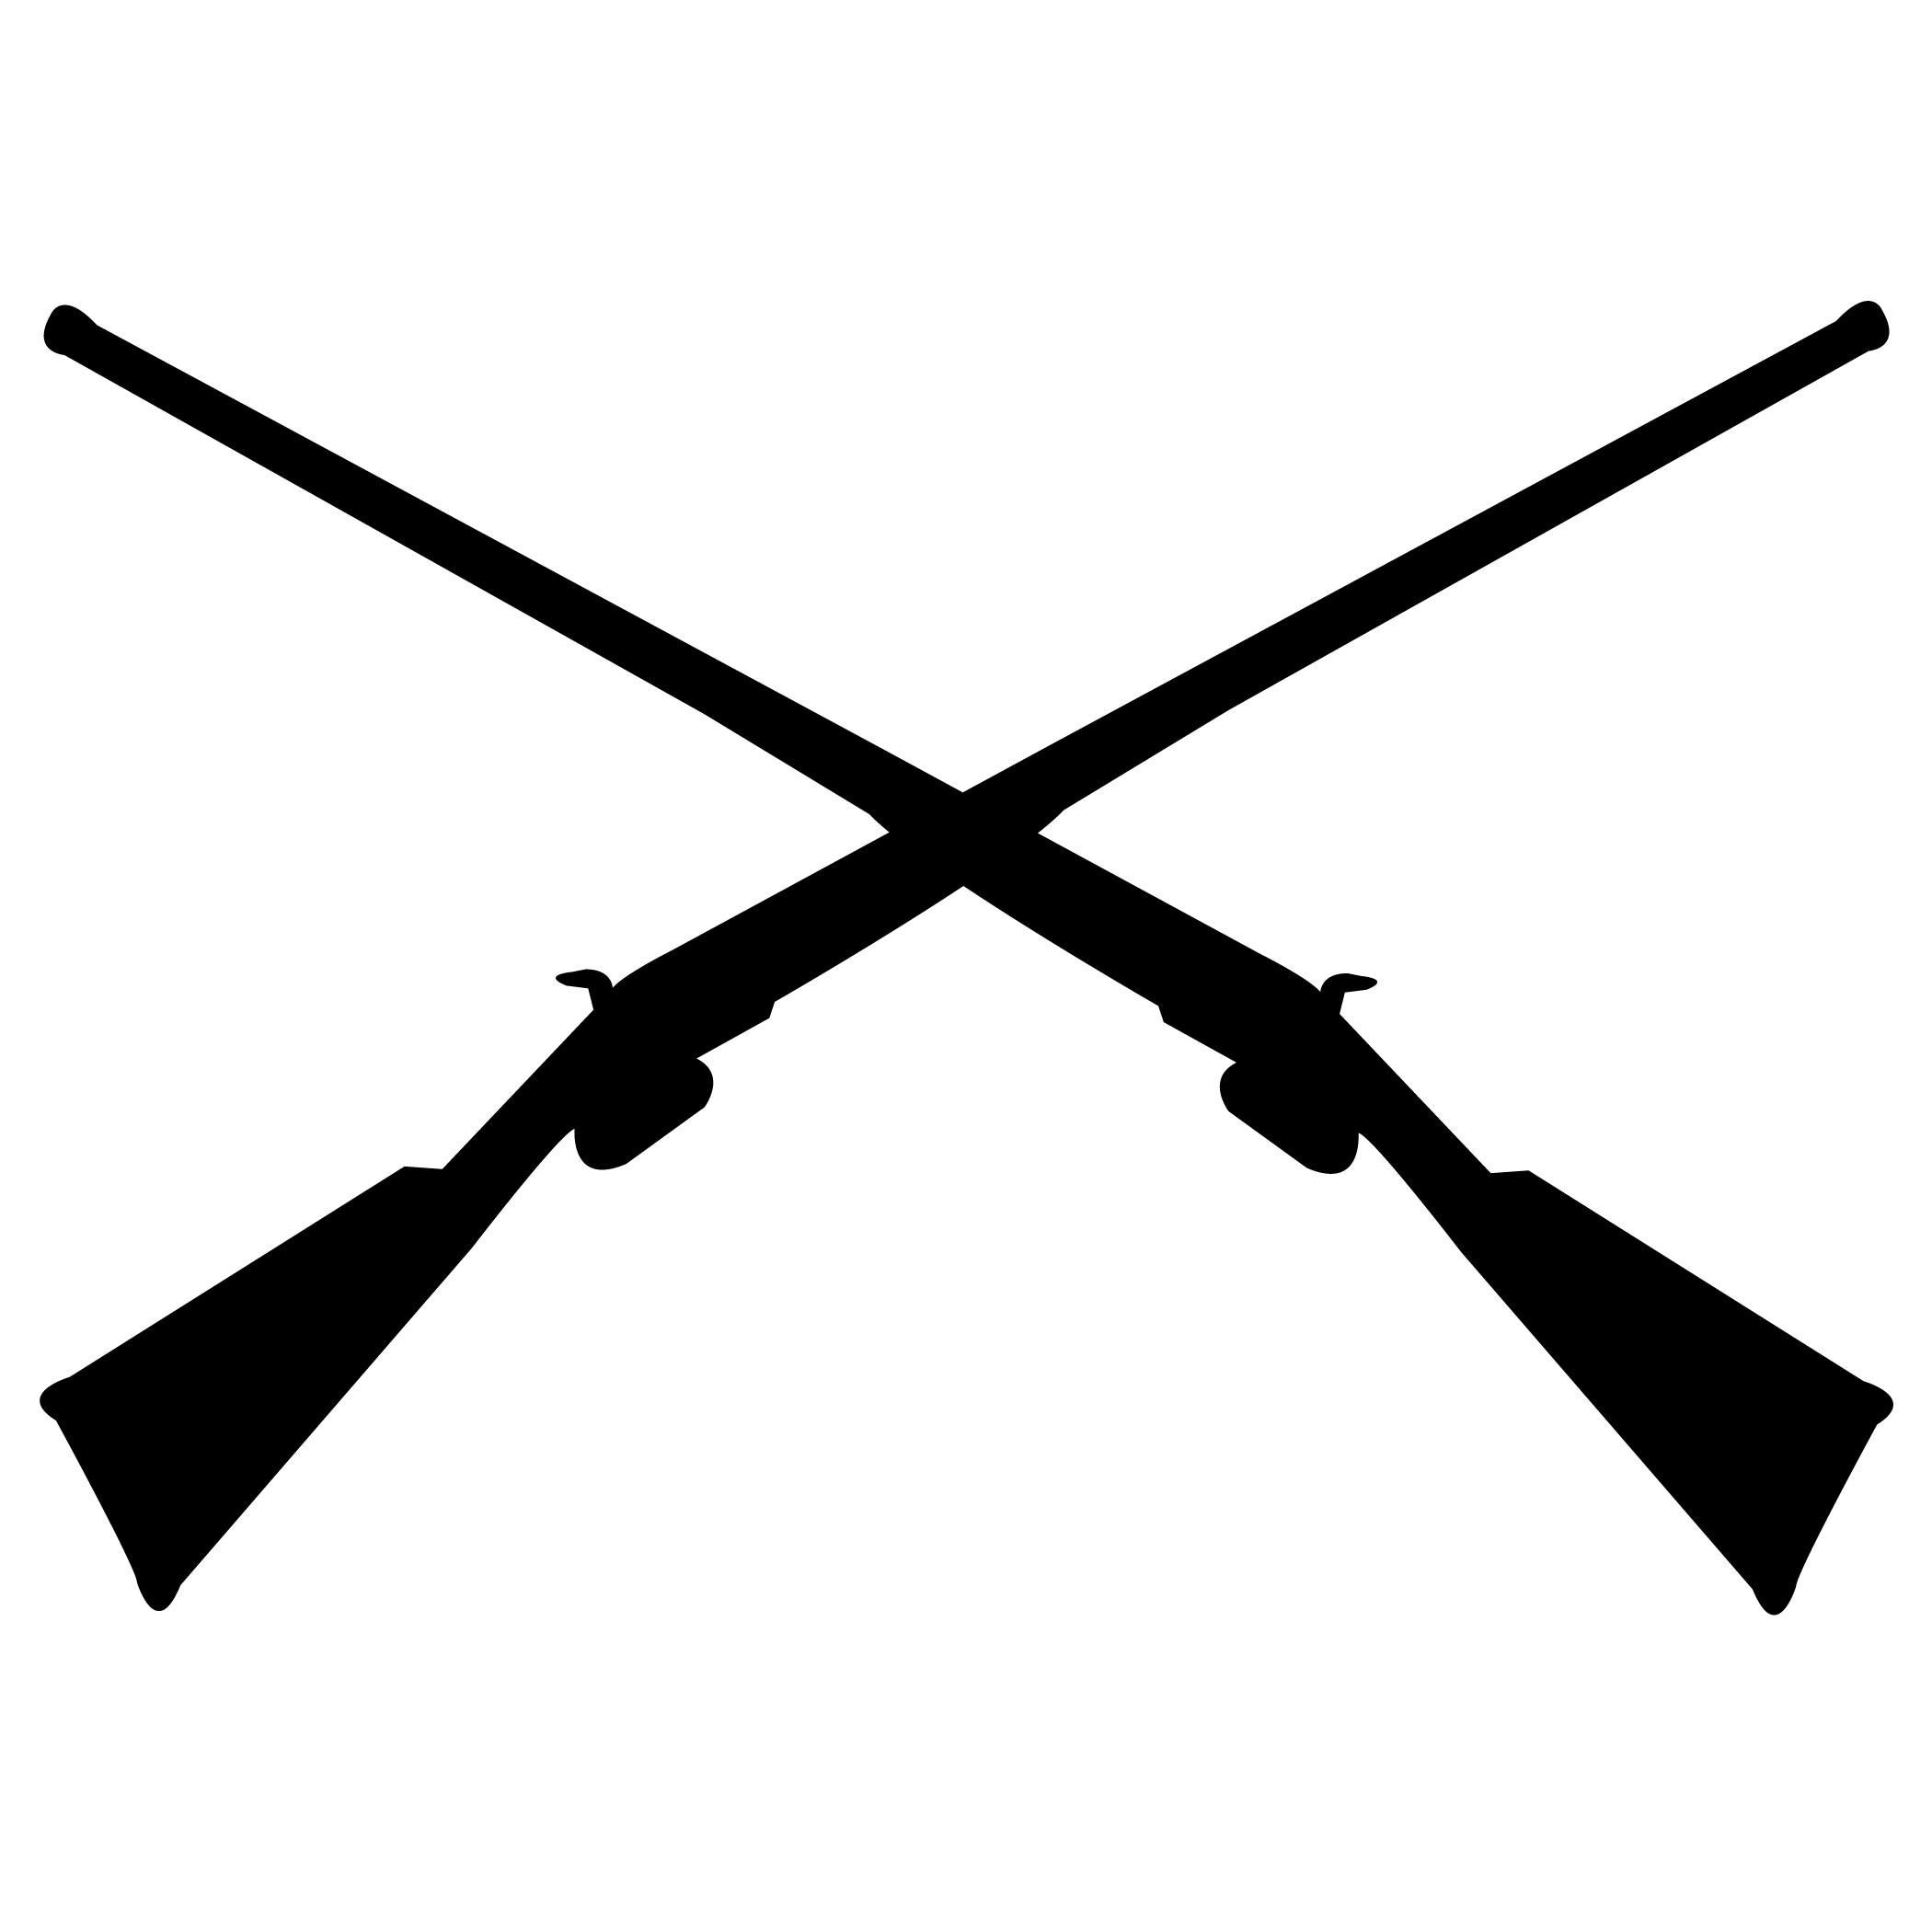 Clip Arts Related To : rifle cartoon no background. 